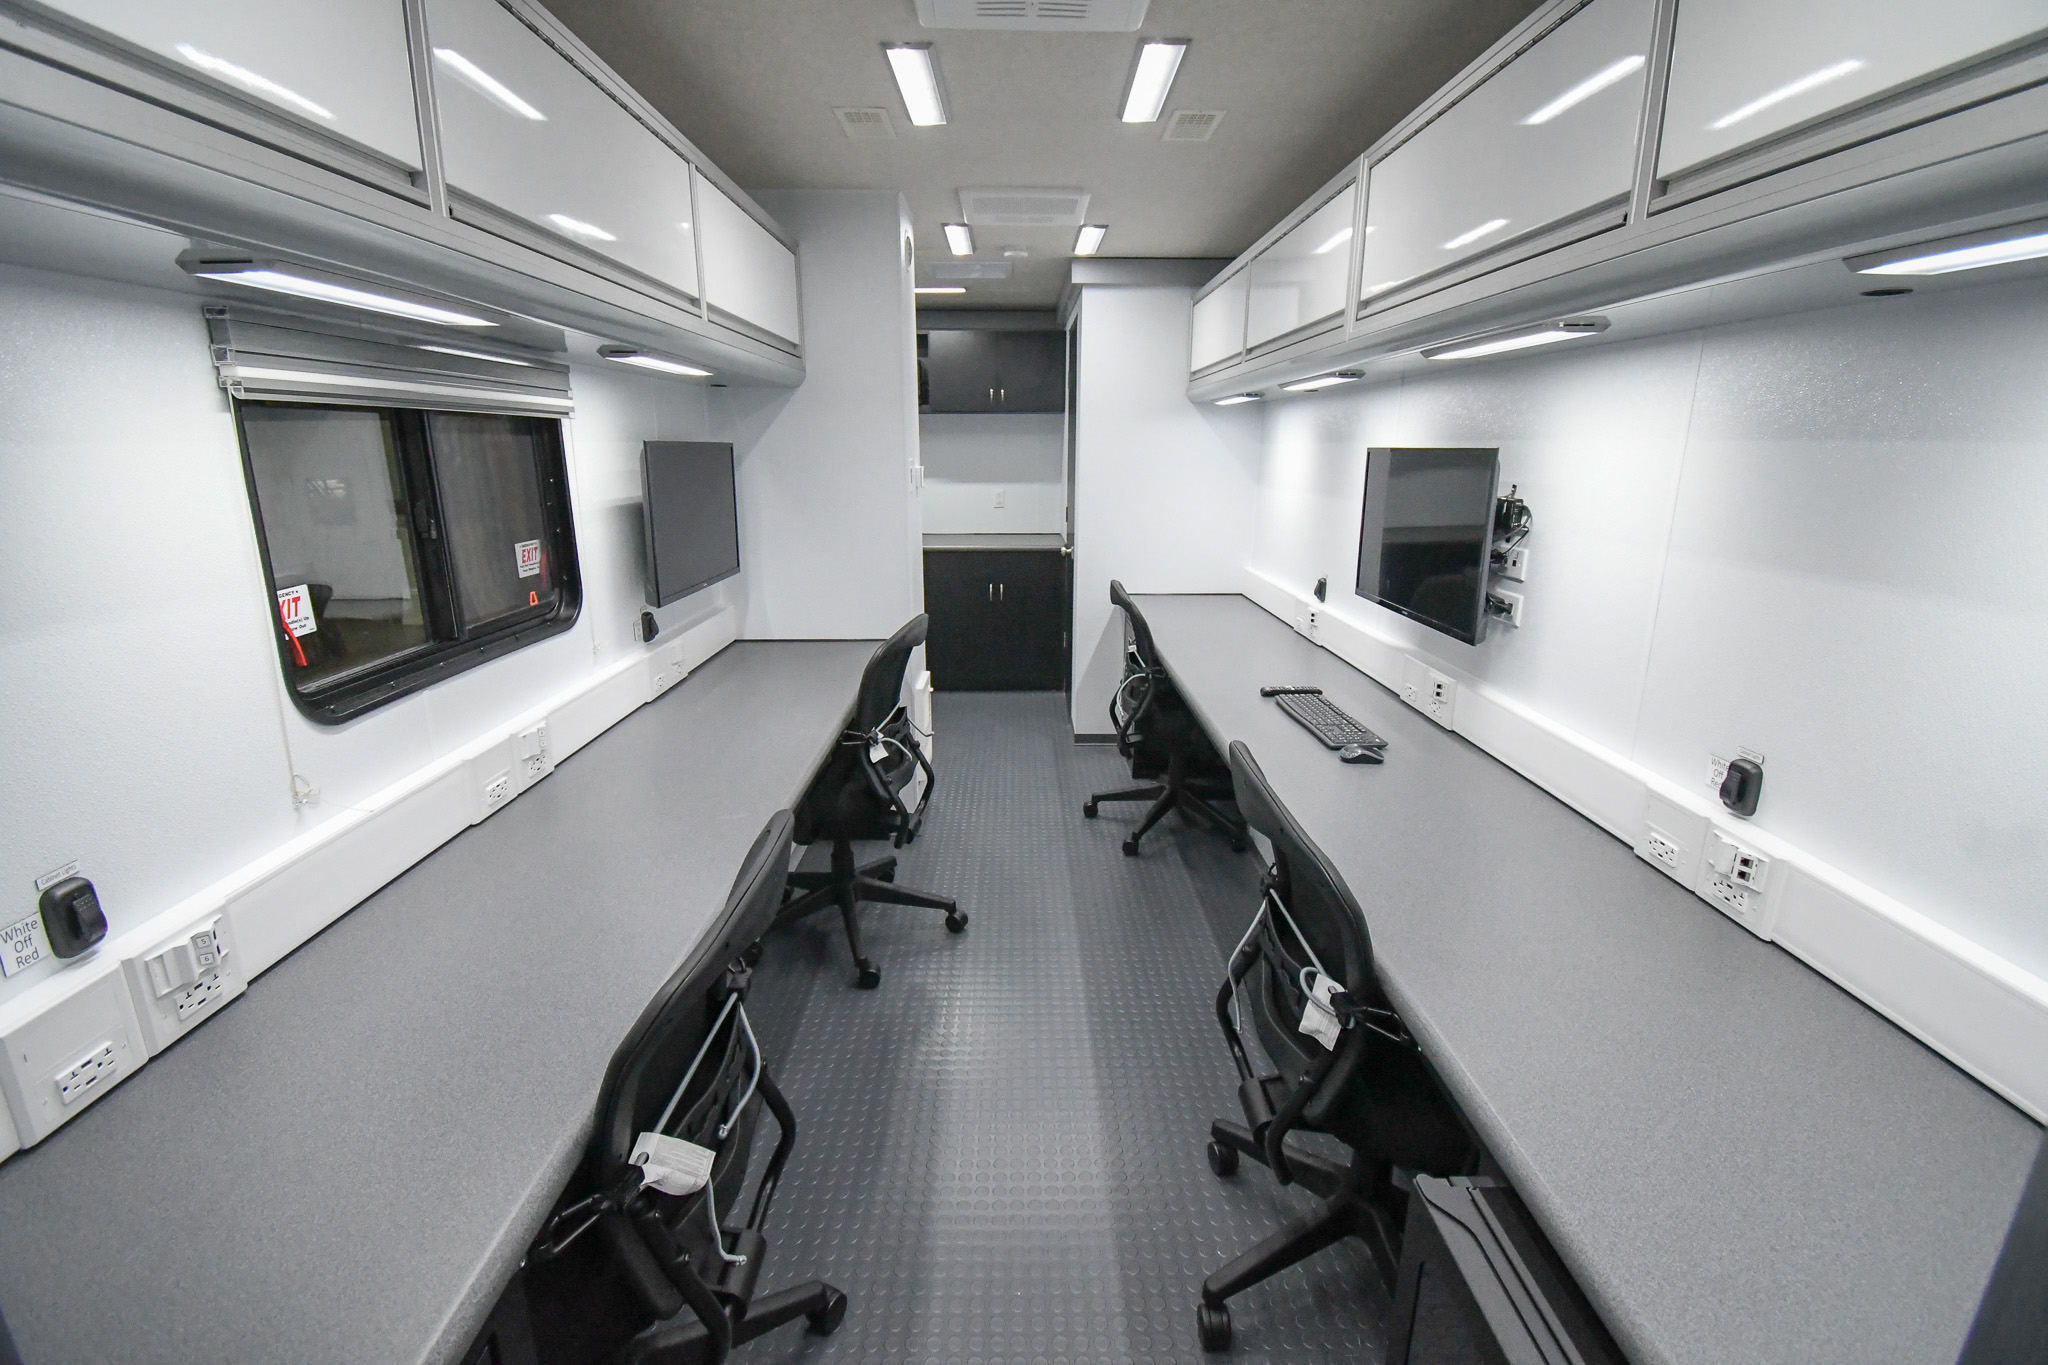 A back-to-front view inside the unit for Richland County, MT.